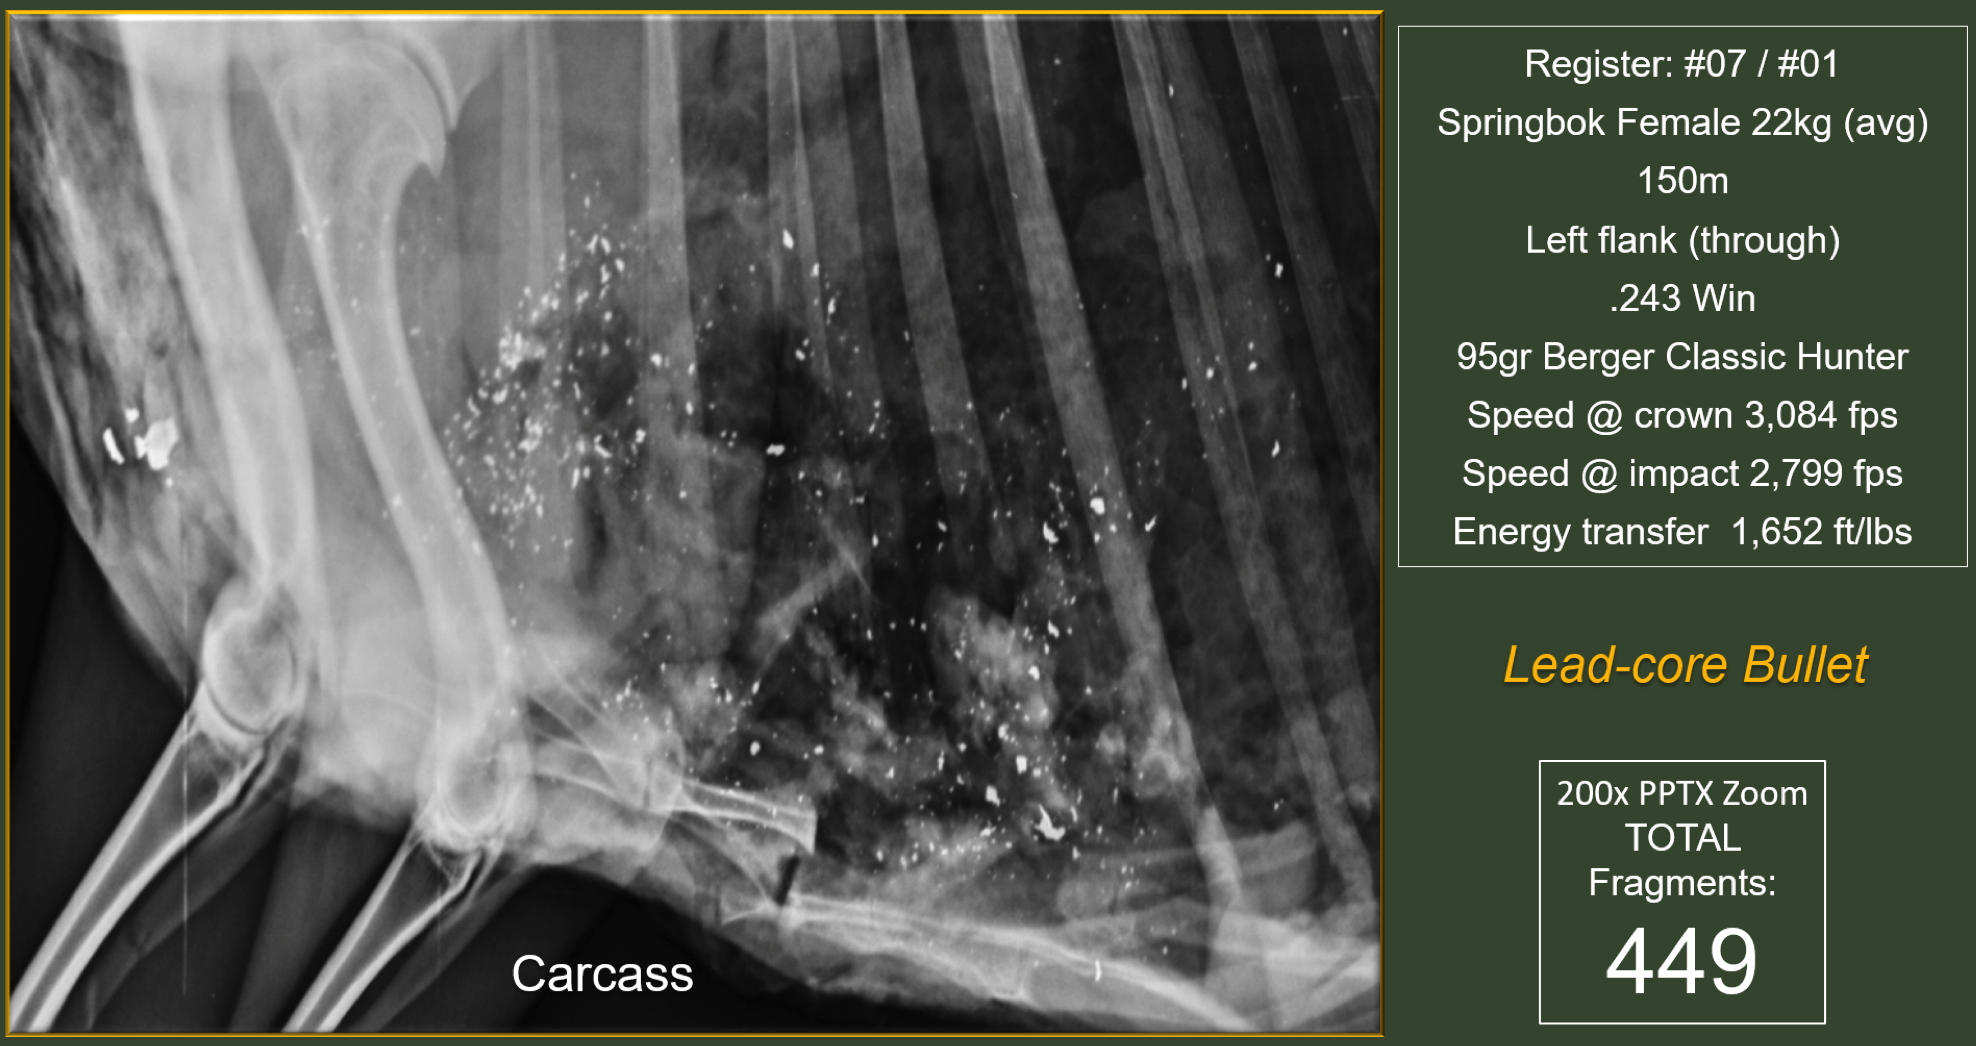 An x-ray of an animal carcass showing tiny lead fragments scattered throughout it.